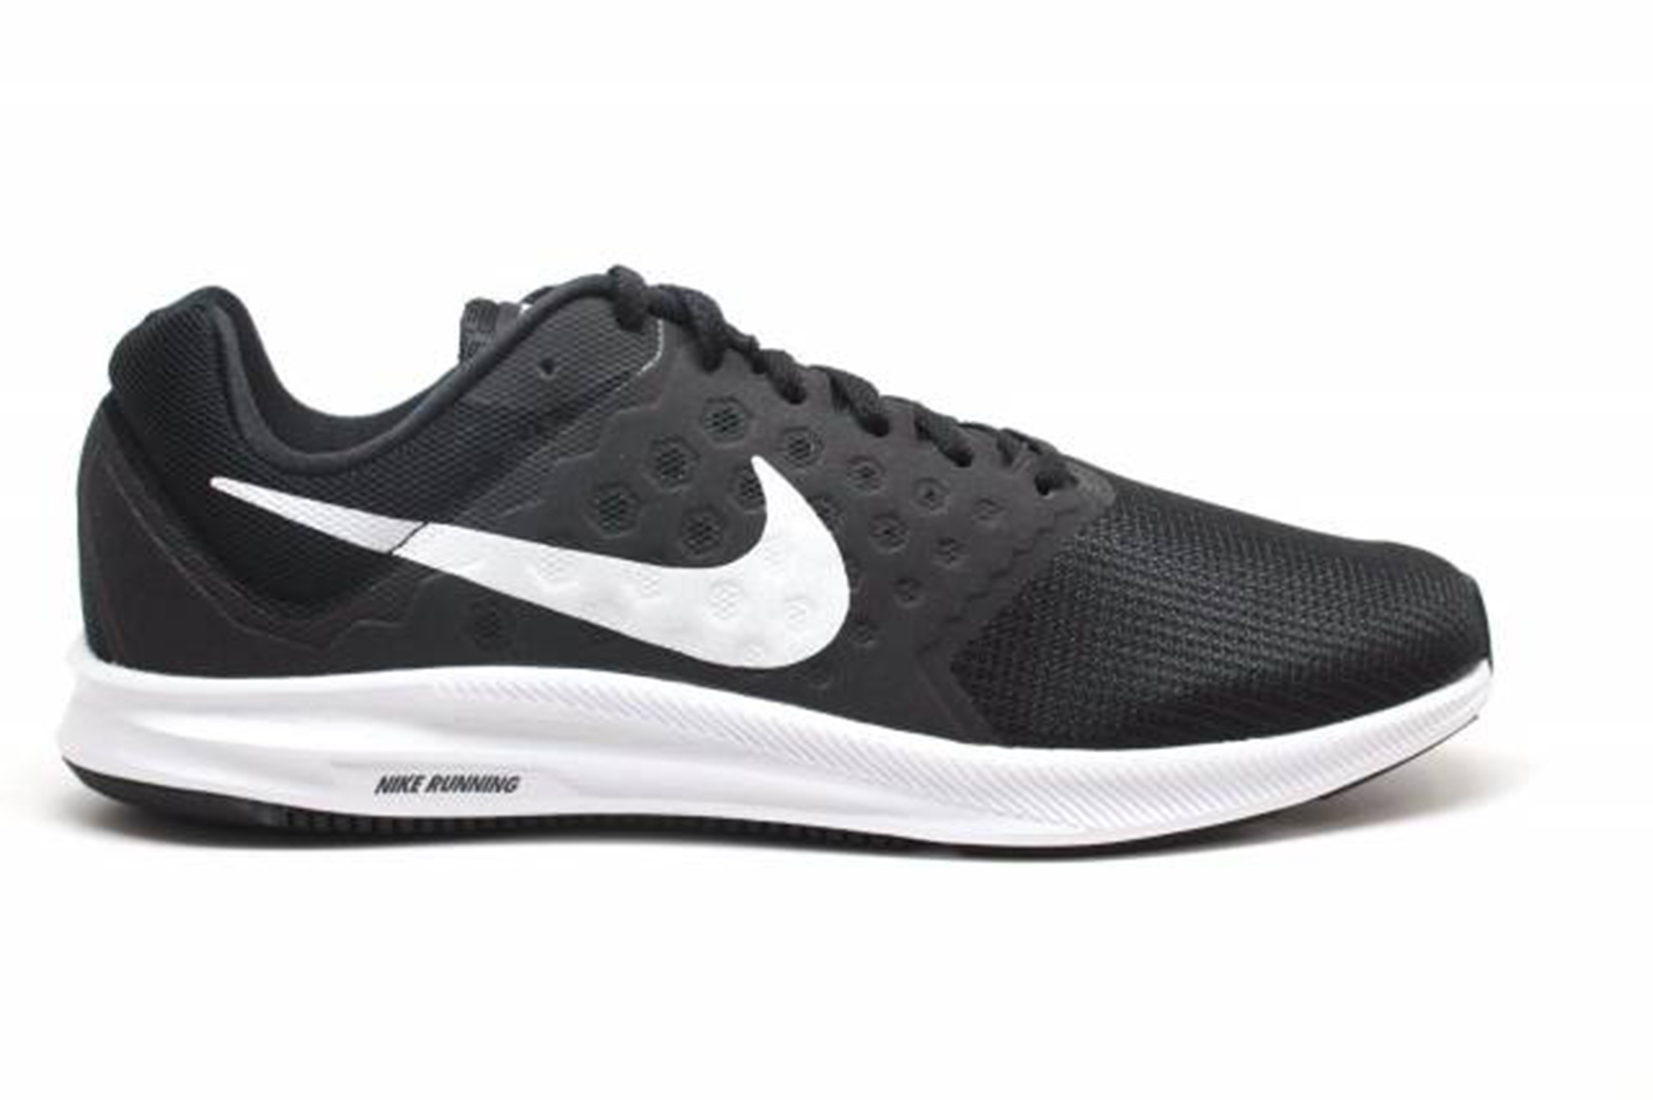 Buy Nike Mens Black Running Shoes Online @ ₹3995 from ShopClues